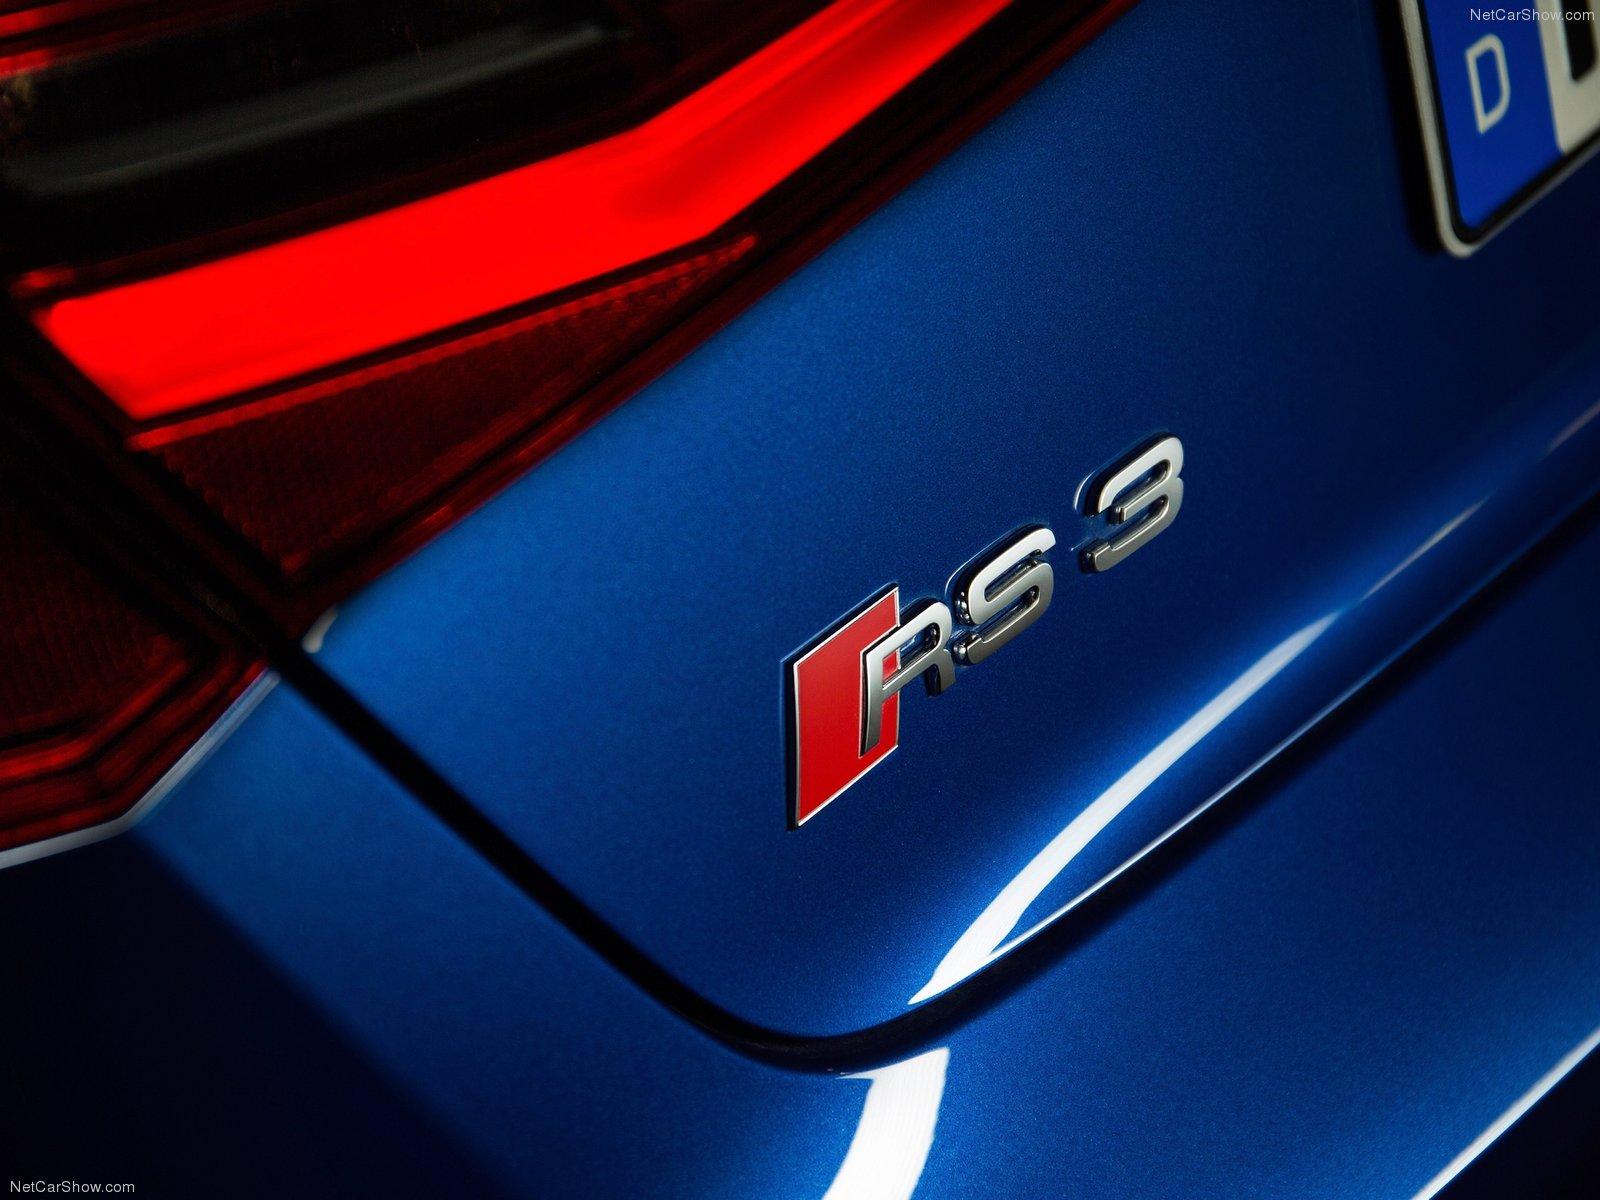 Audi RS3 Sportback picture. Audi photo gallery